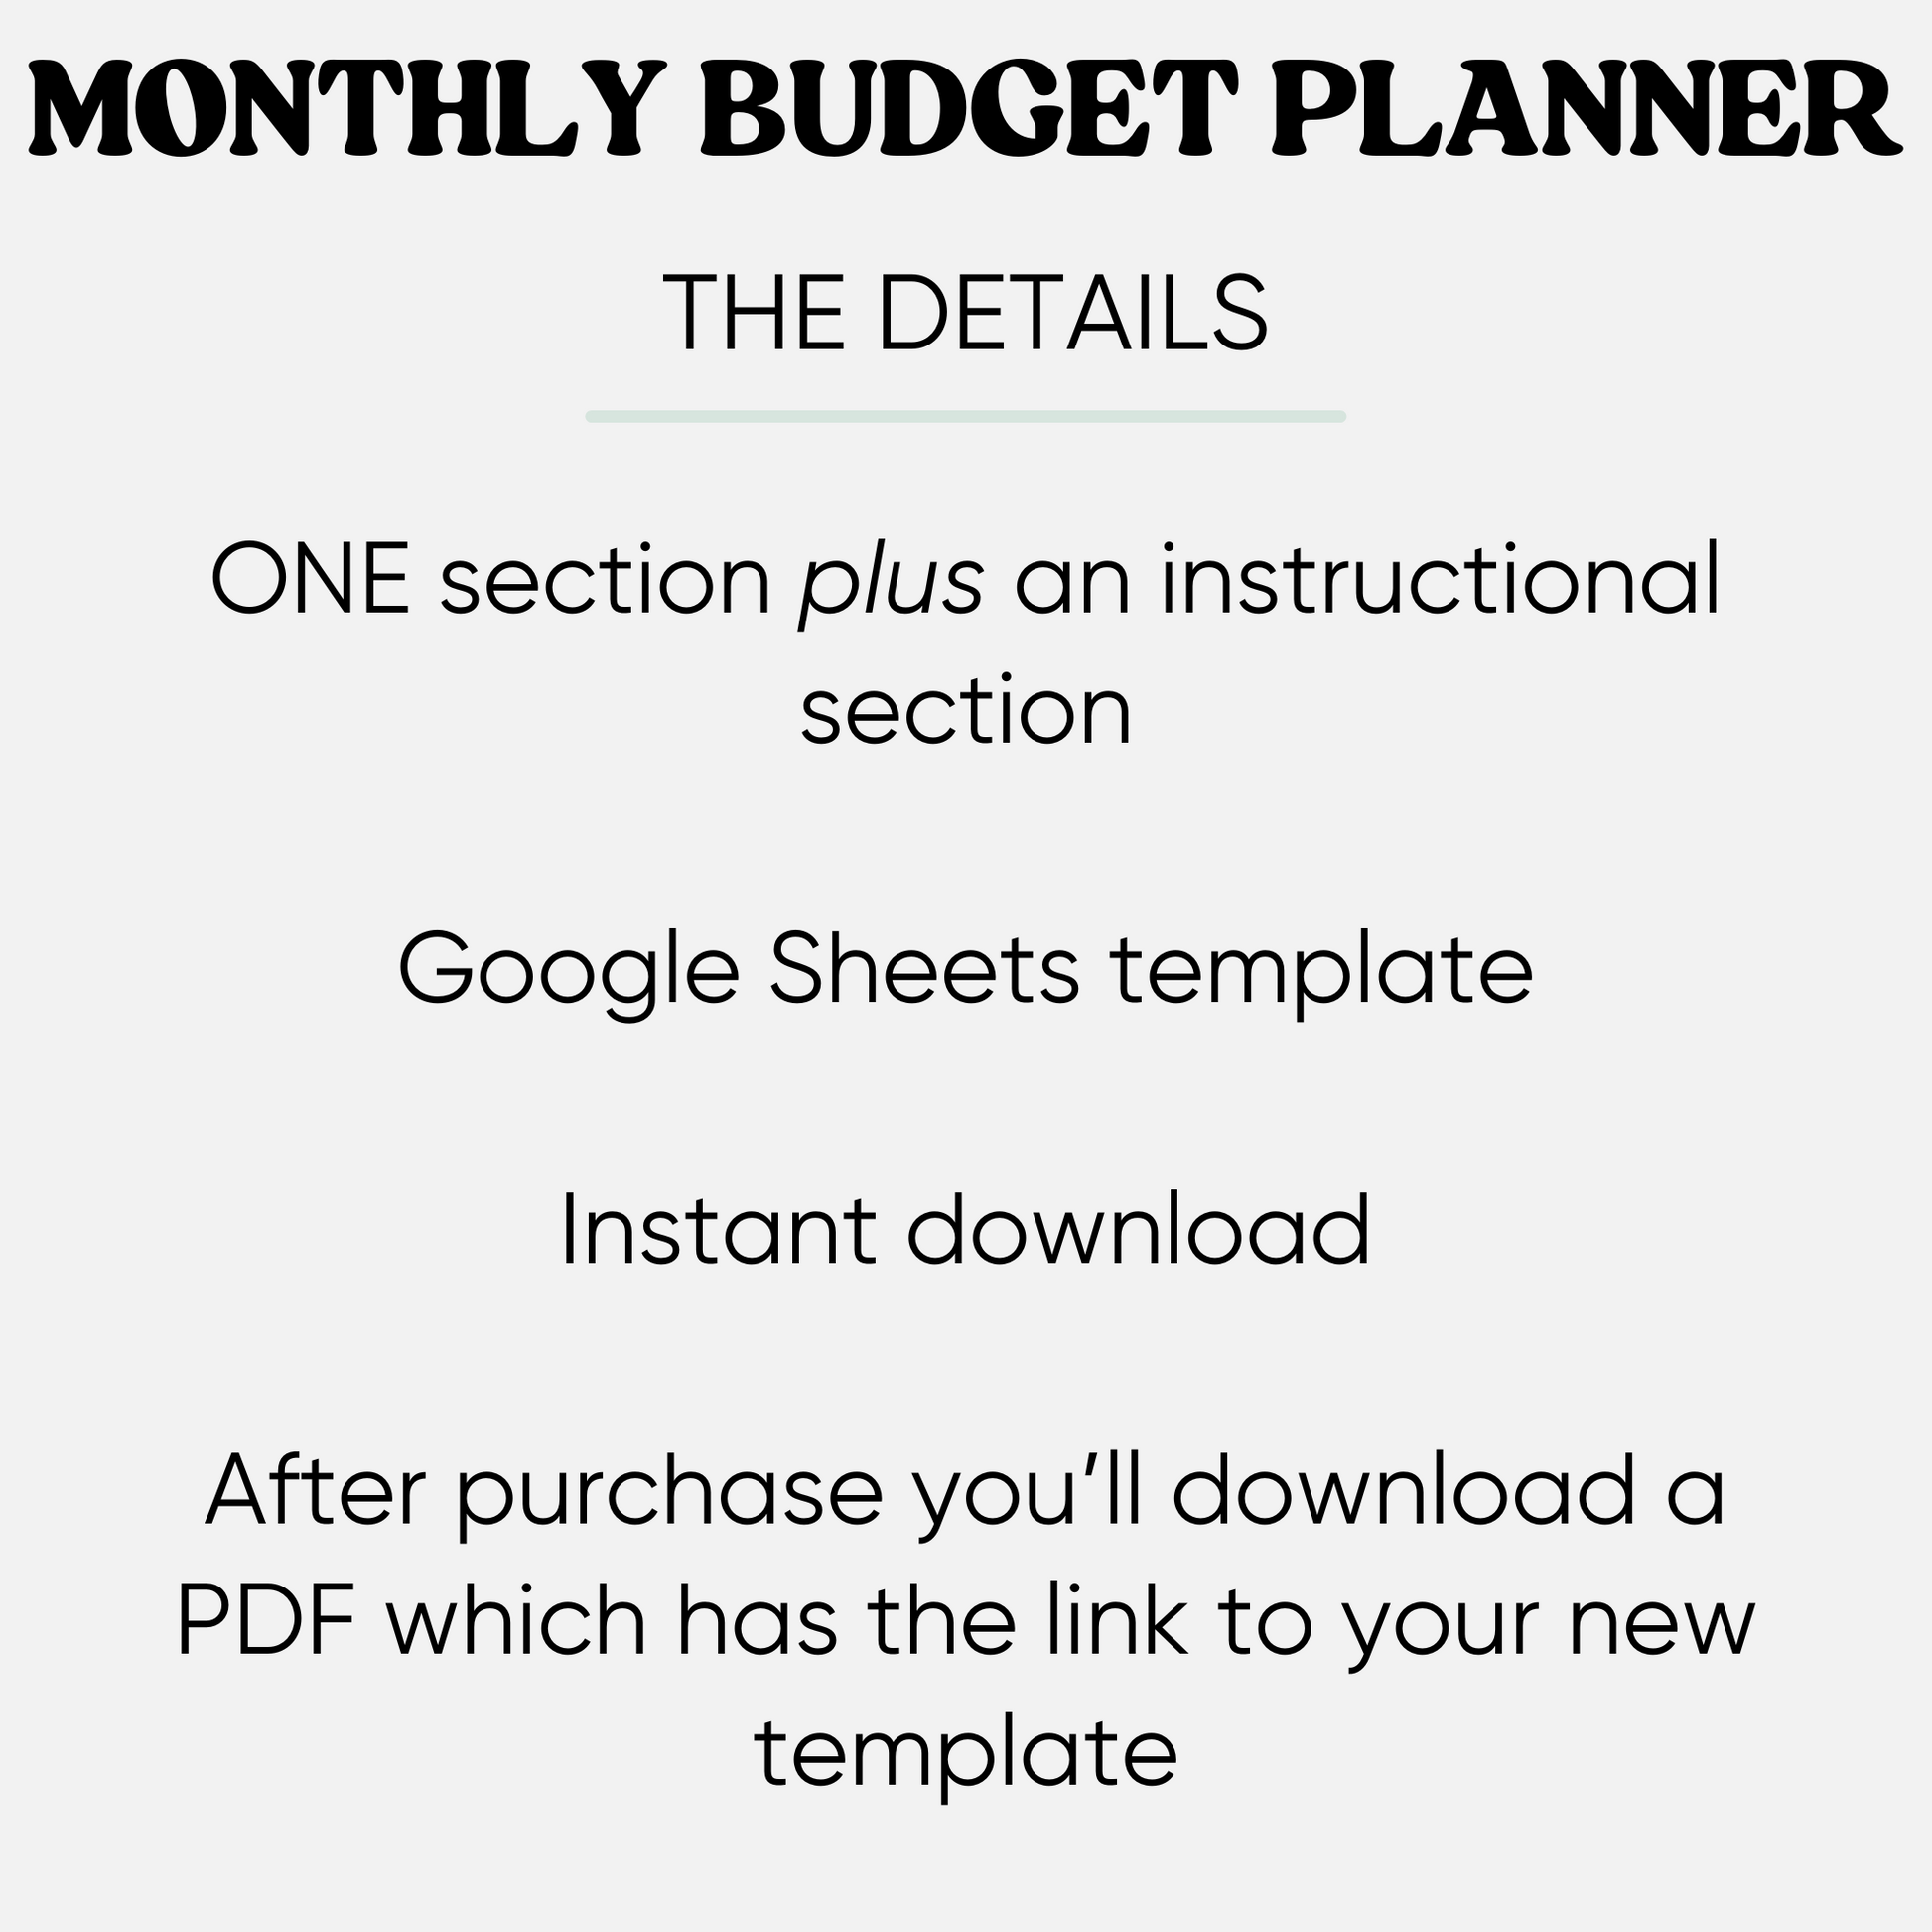 Screenshot of the Digital Monthly Budget Planner for Google Sheets, a powerful tool for managing personal finance. The image emphasizes sections for income, savings, investments, subscriptions, debt, and bills tracking.